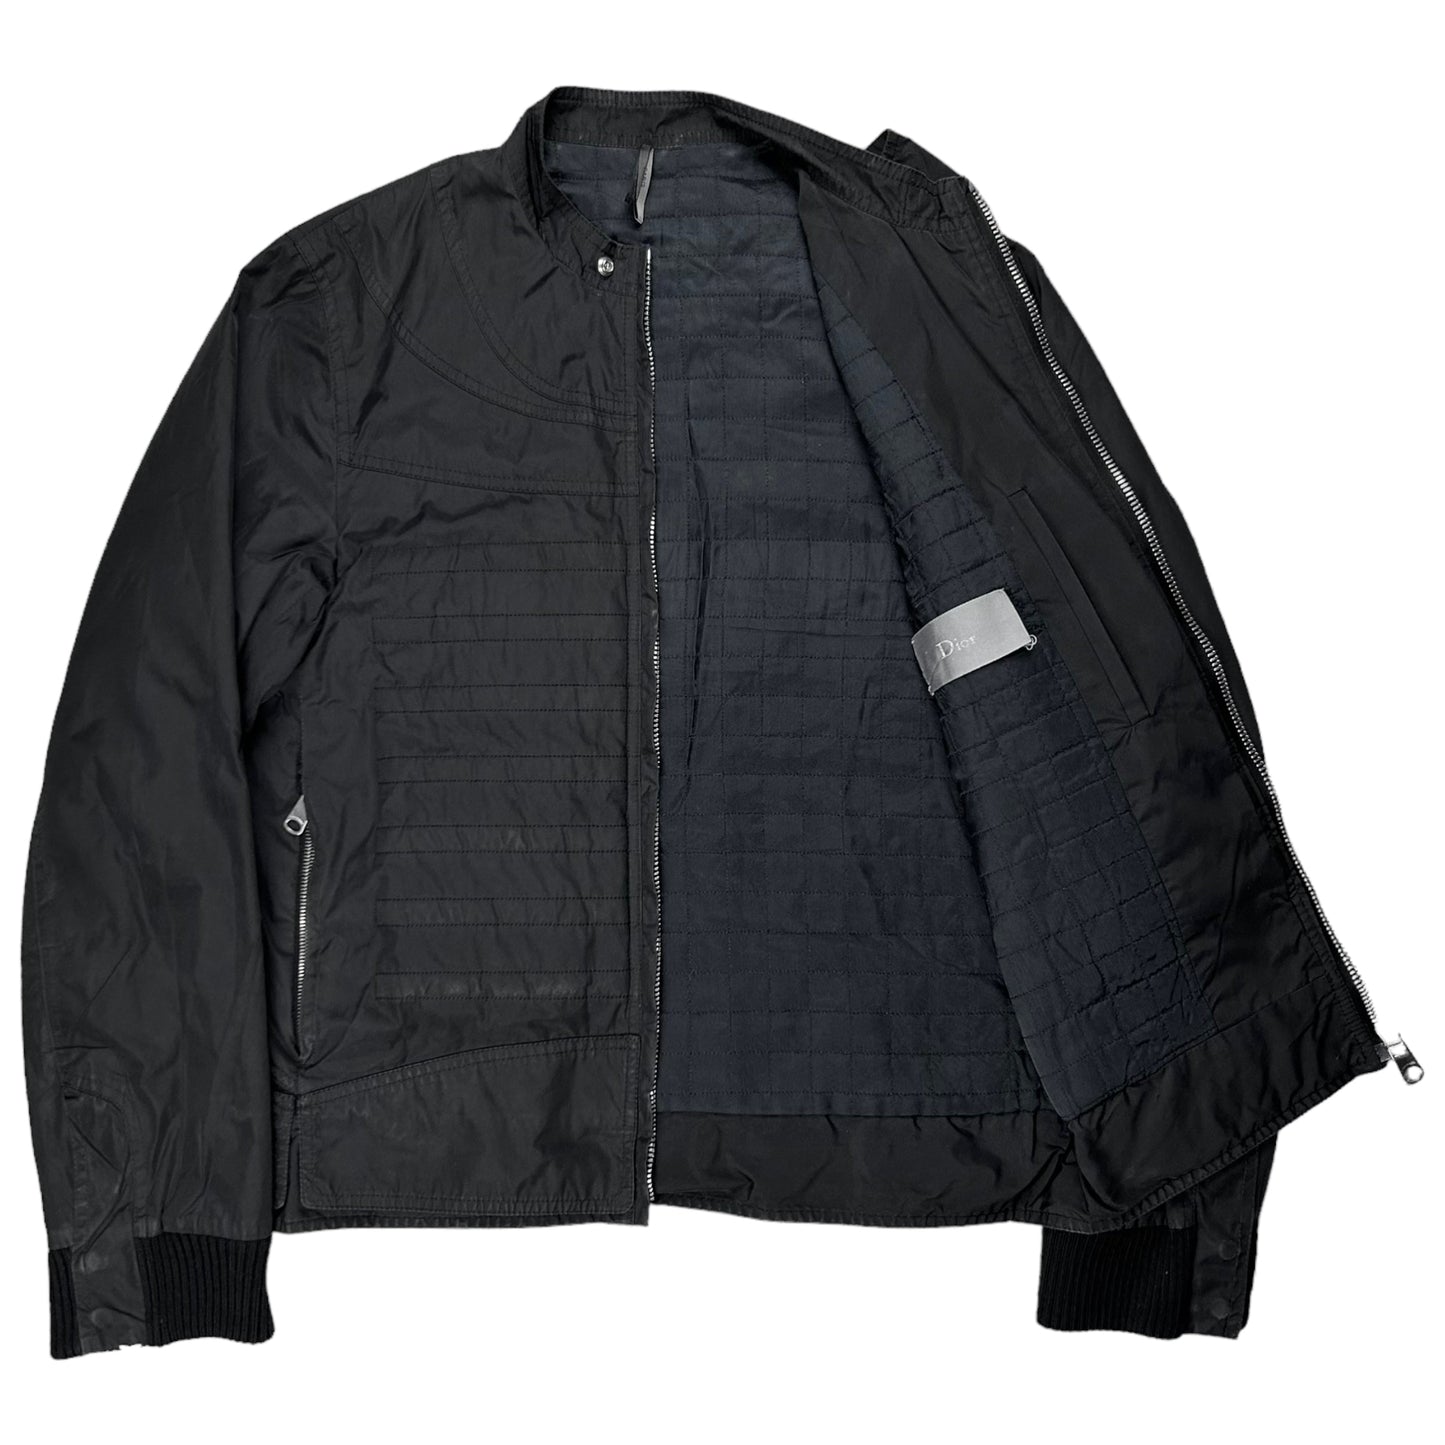 Dior Homme Panelled Cropped Moto Bomber Jacket - AW08